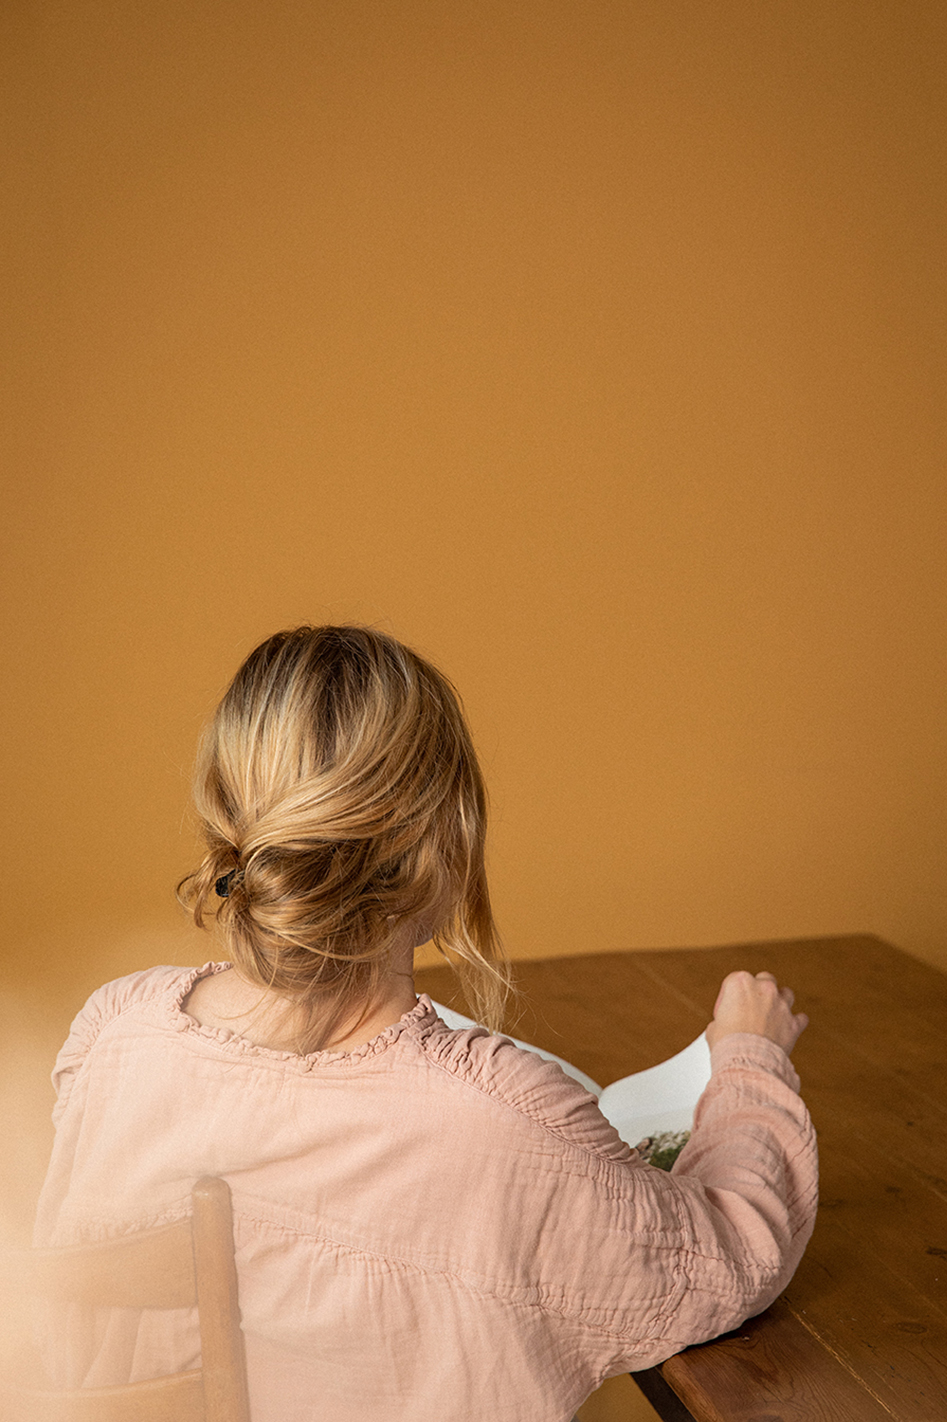 Woman from behind reading a book